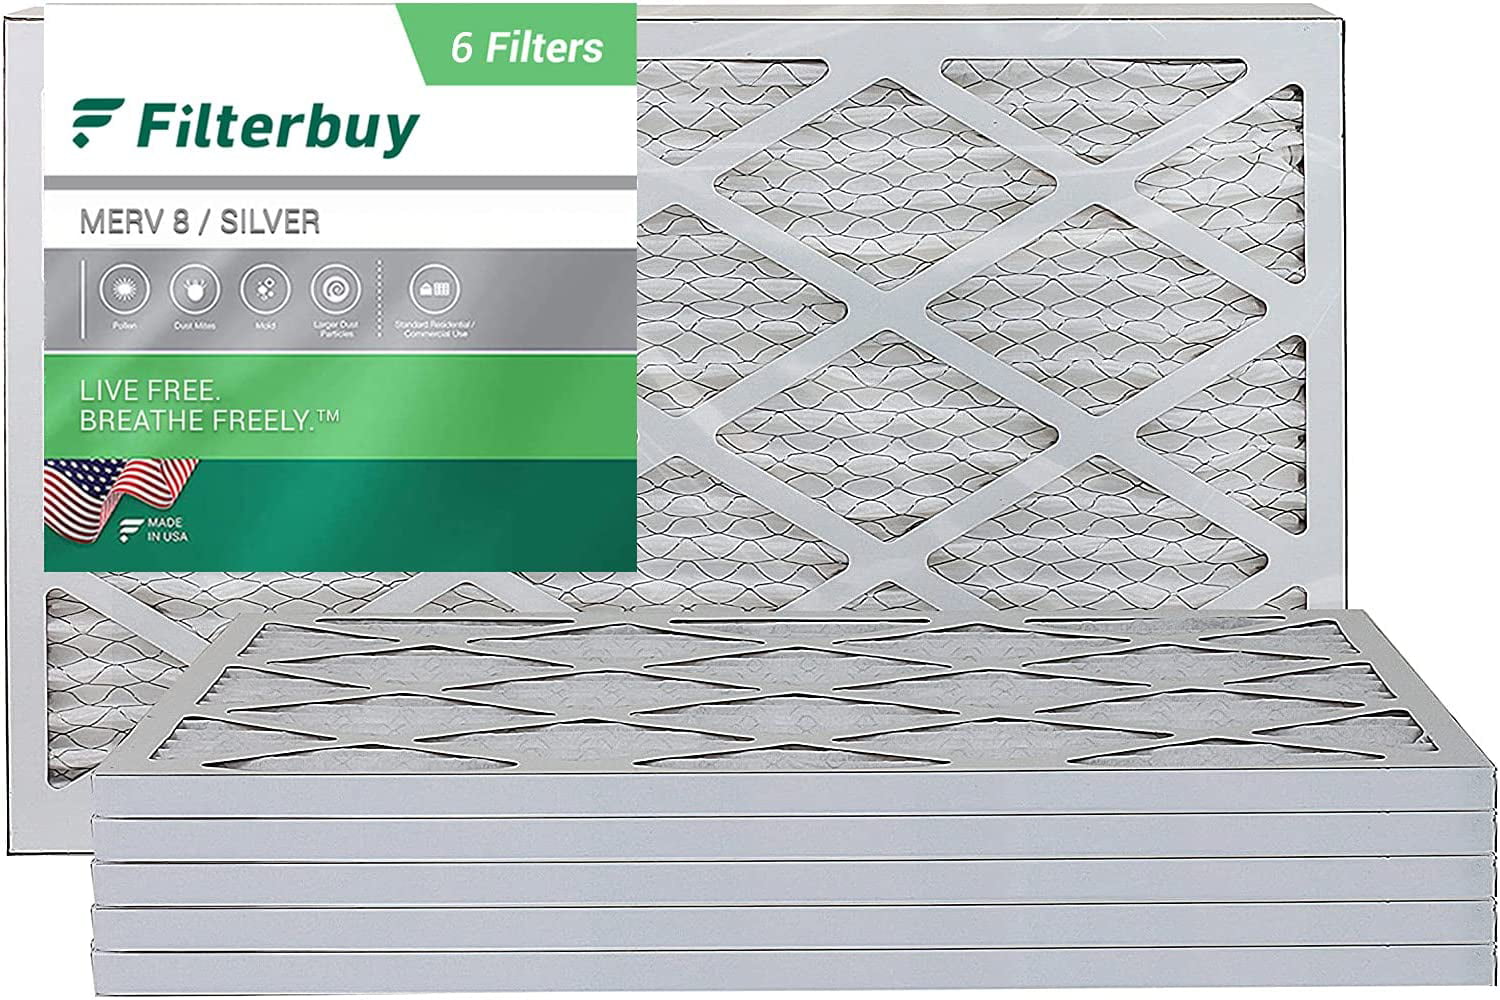 Nordic Pure 20x30x1 MERV 8 Pleated AC Furnace Air Filters 2 Pack